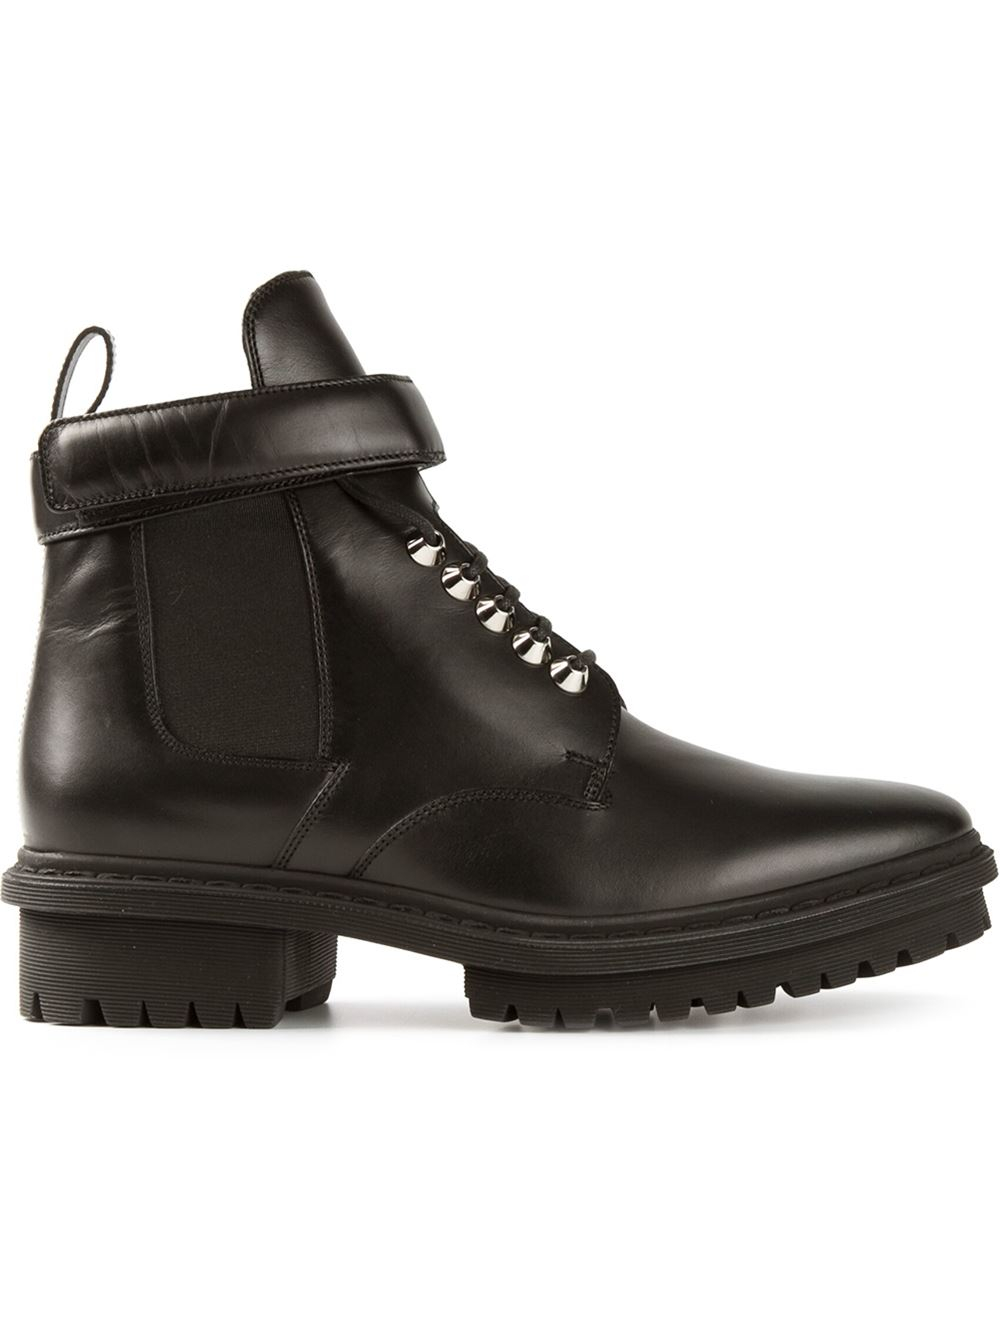 Lyst - Balenciaga Lace Up Boots in Black for Men